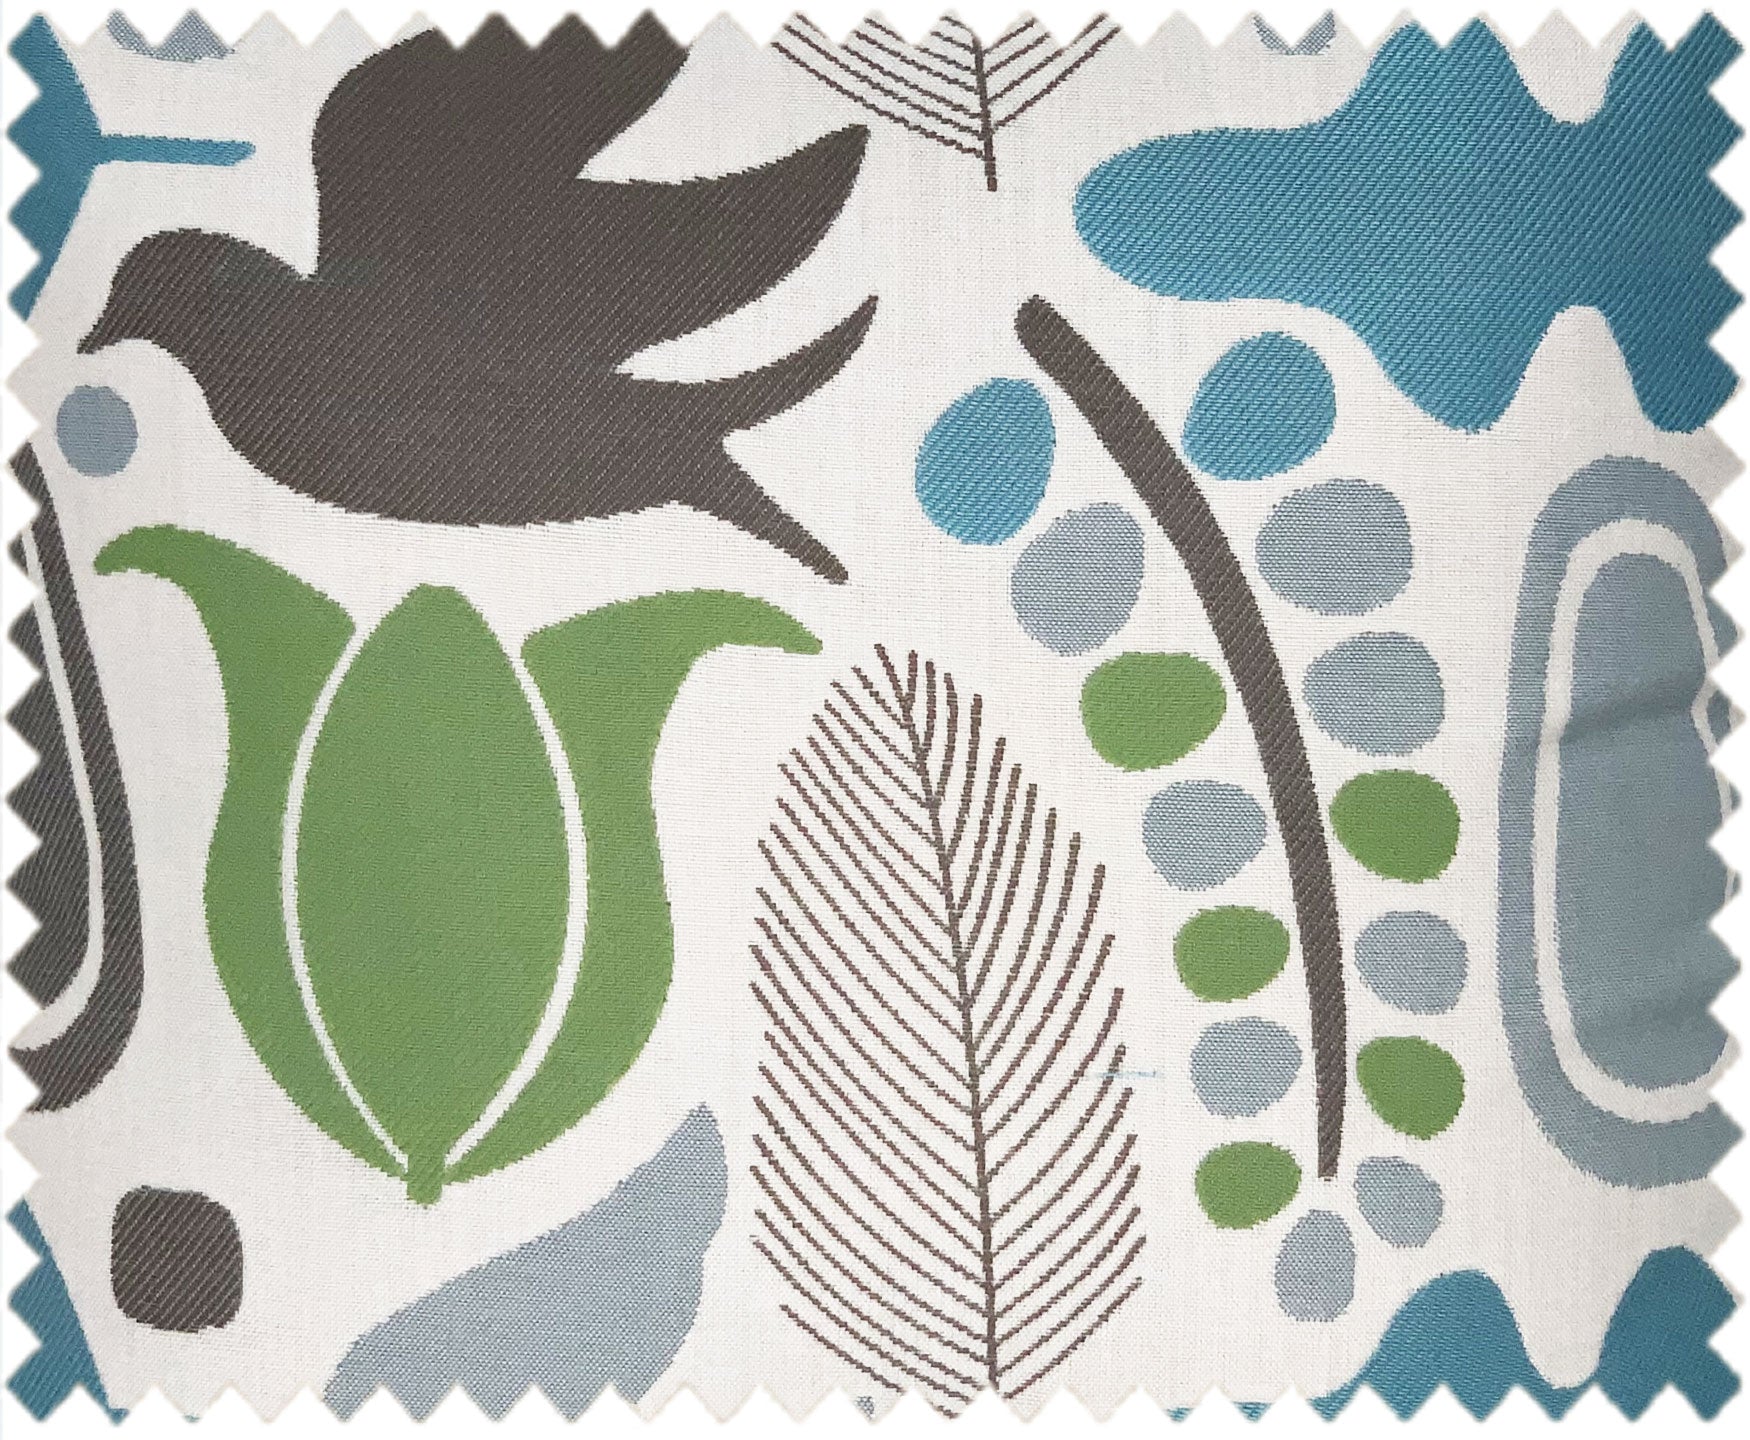 Sunbrella® Feather in Earthy Outdoor SWATCH